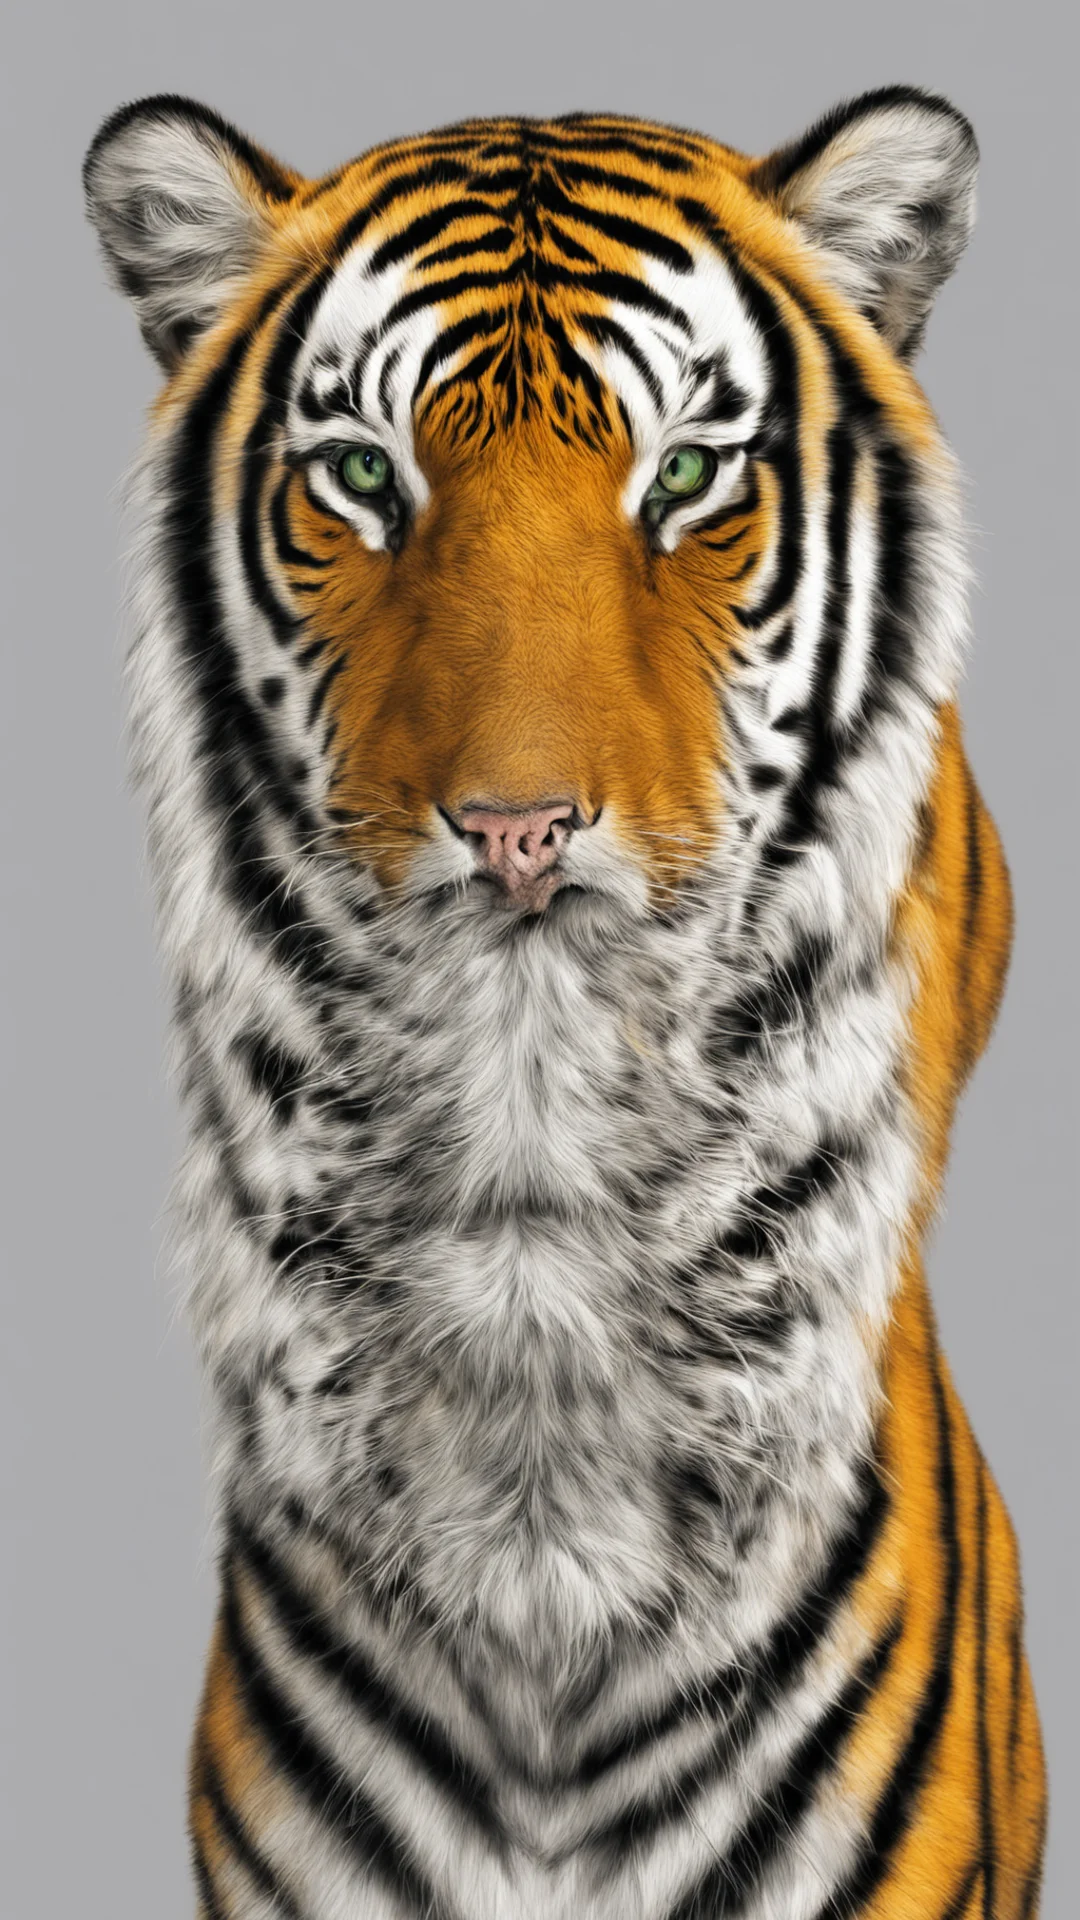 a tiger amazing awesome portrait 2 tall